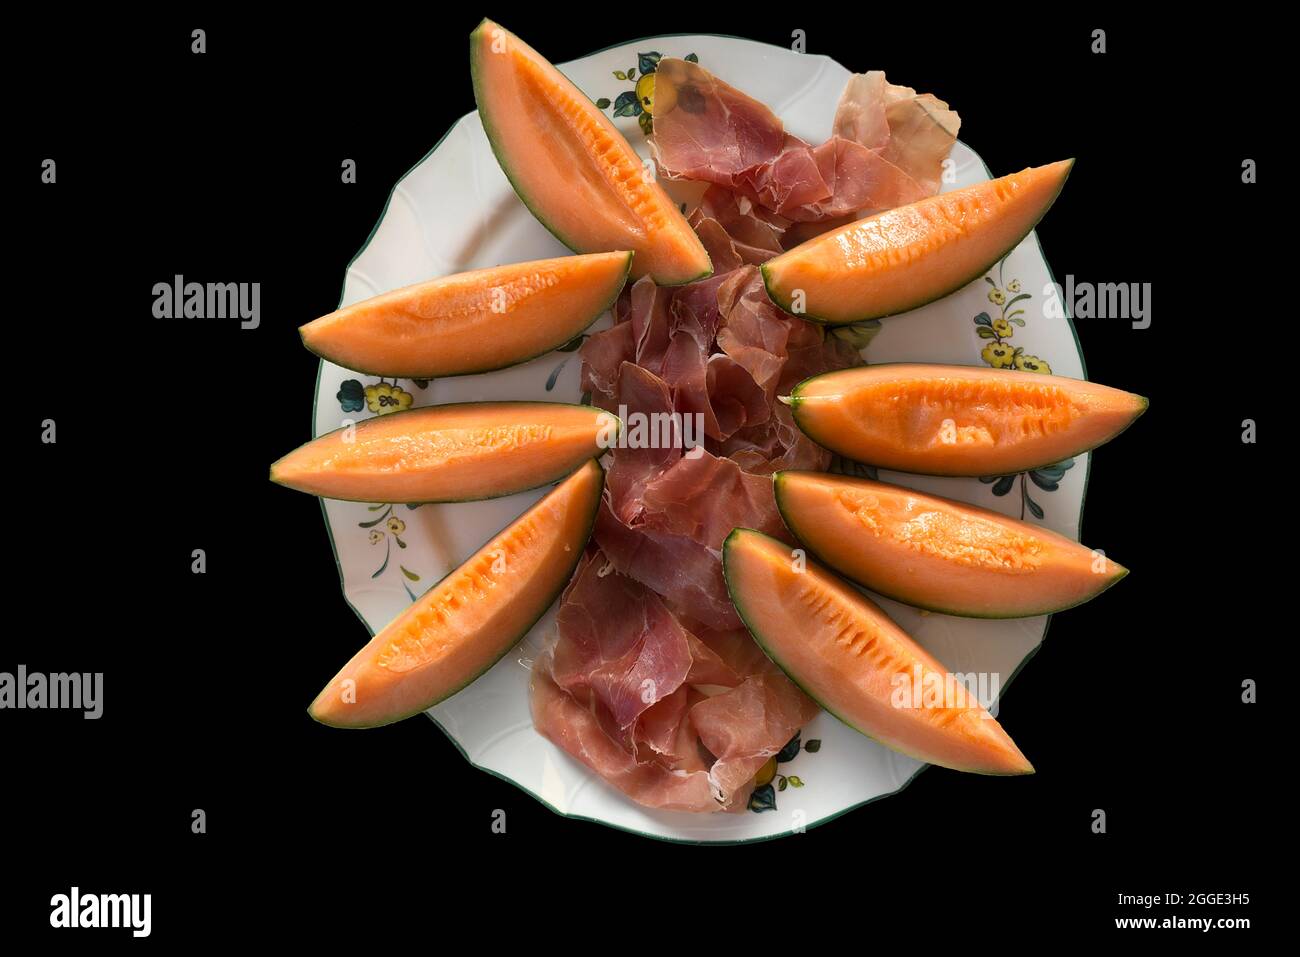 Ham and honeydew melon served on a plate, Bavaria, Germany Stock Photo